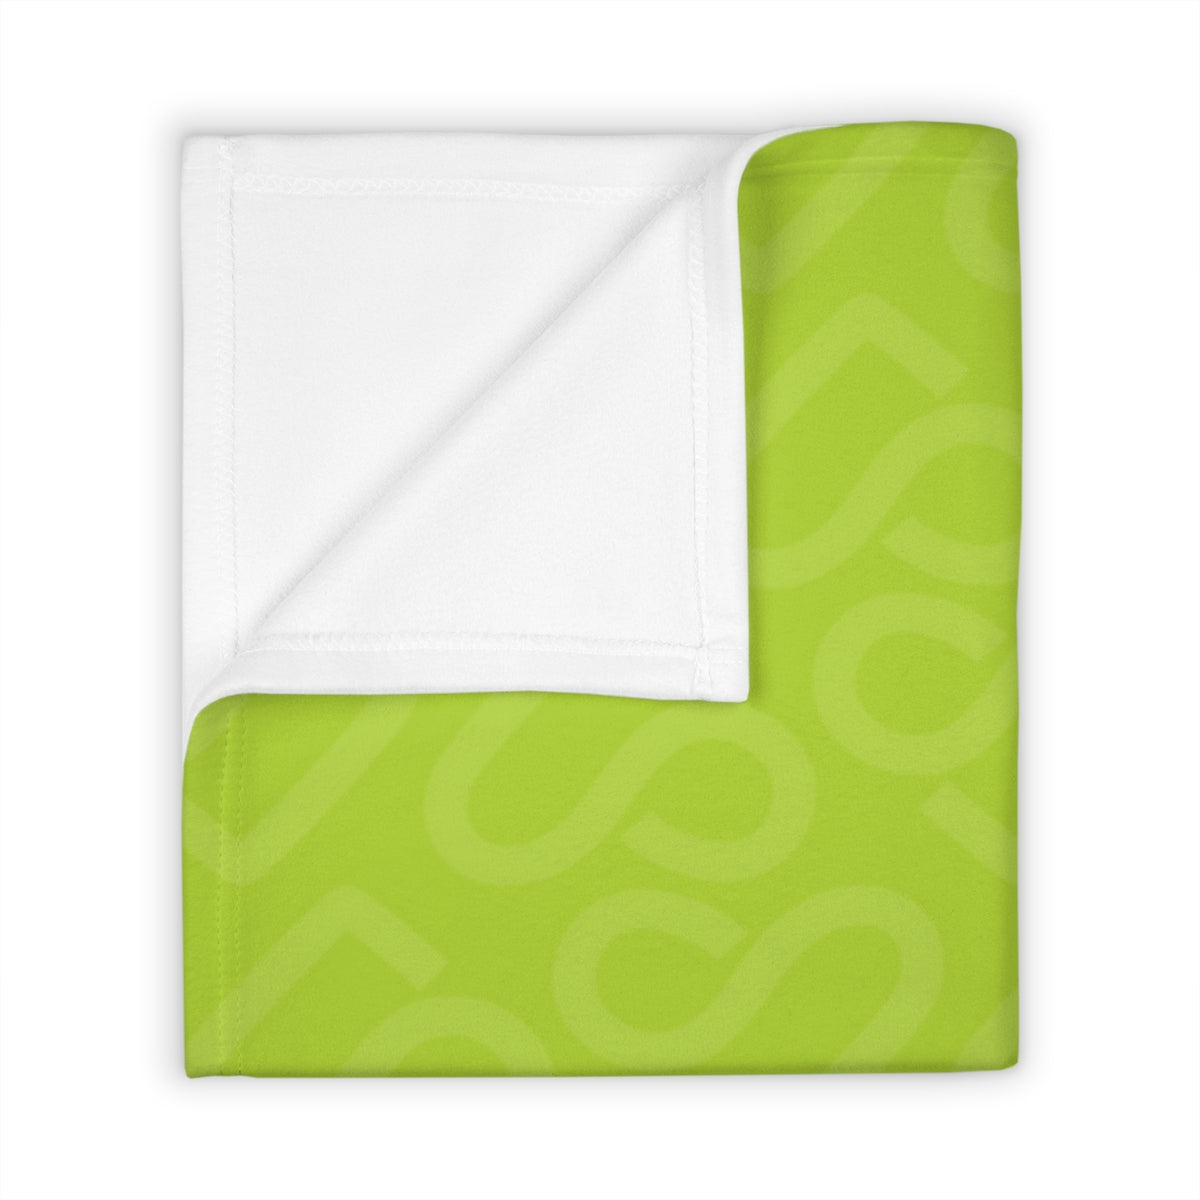 Note To Self: I Love You Green Throw Blanket